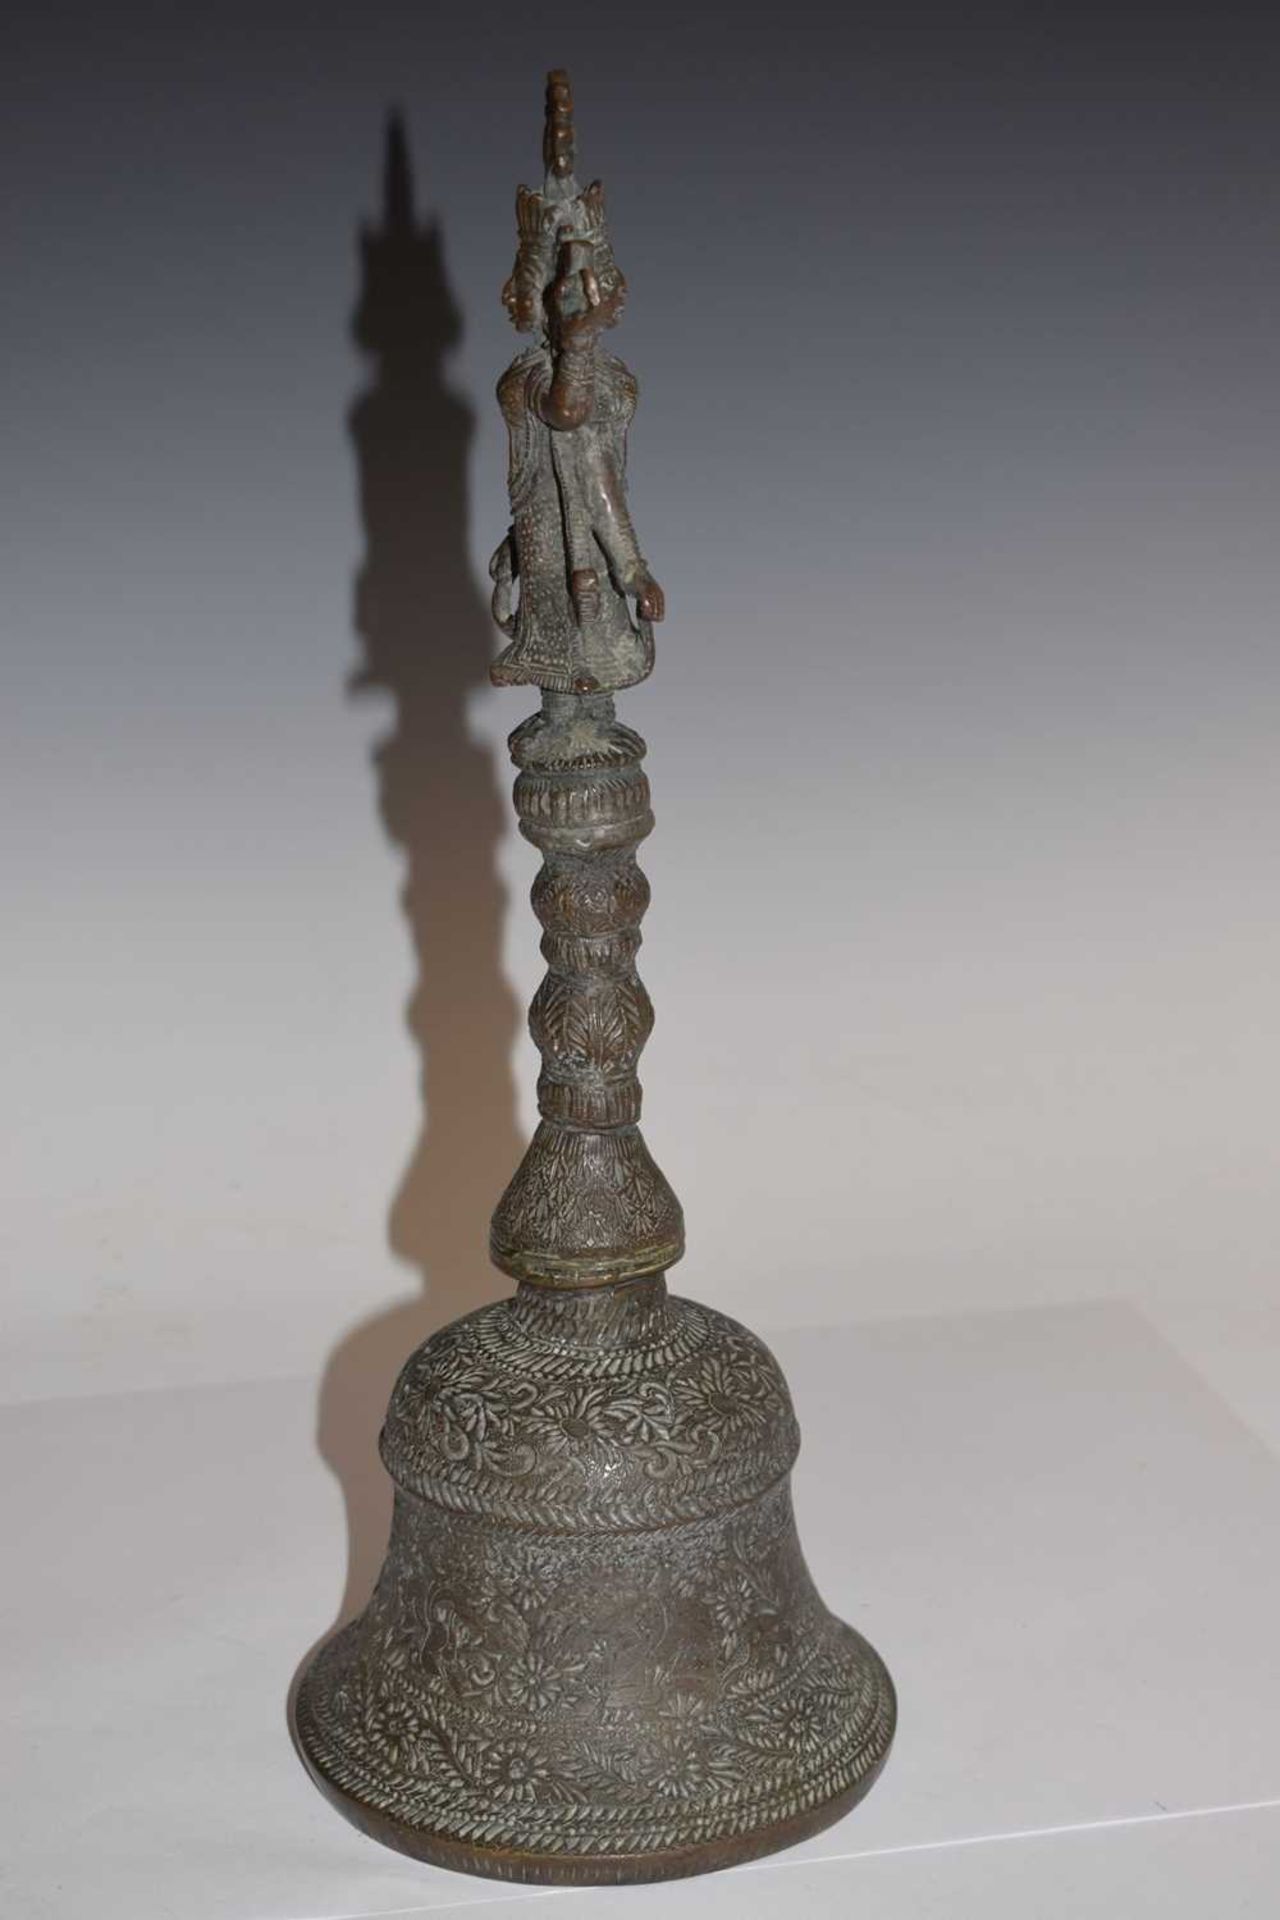 Large Indian cast bronze temple bell - Image 8 of 10